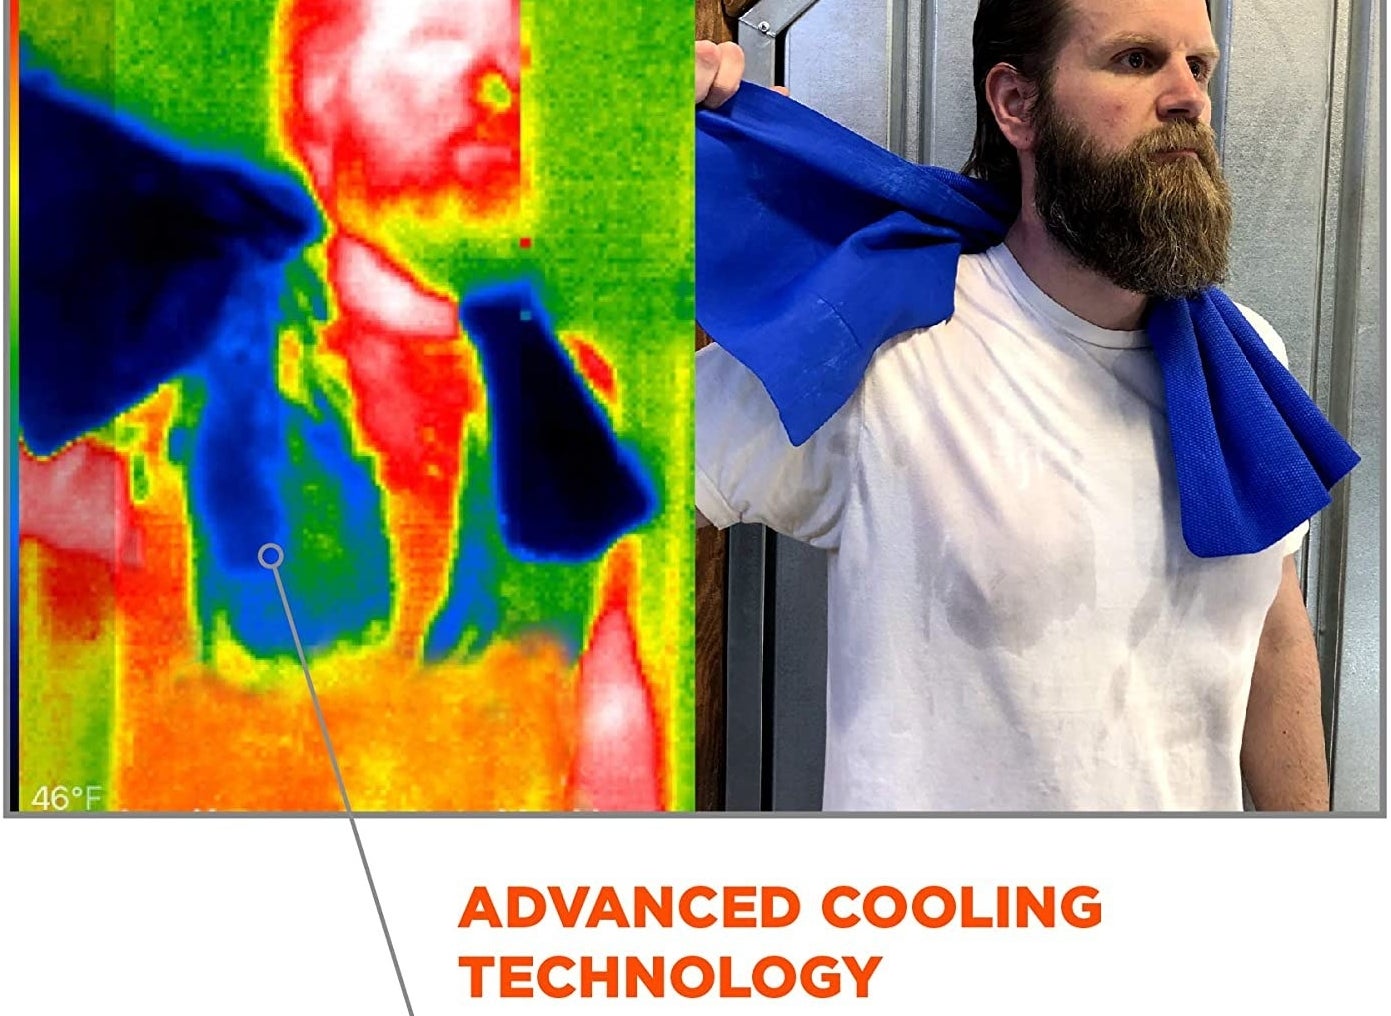 A man holding a blue towel wrapped around his neck and thermal scan of the image shows that the towel is colder than the rest of the surroundings.